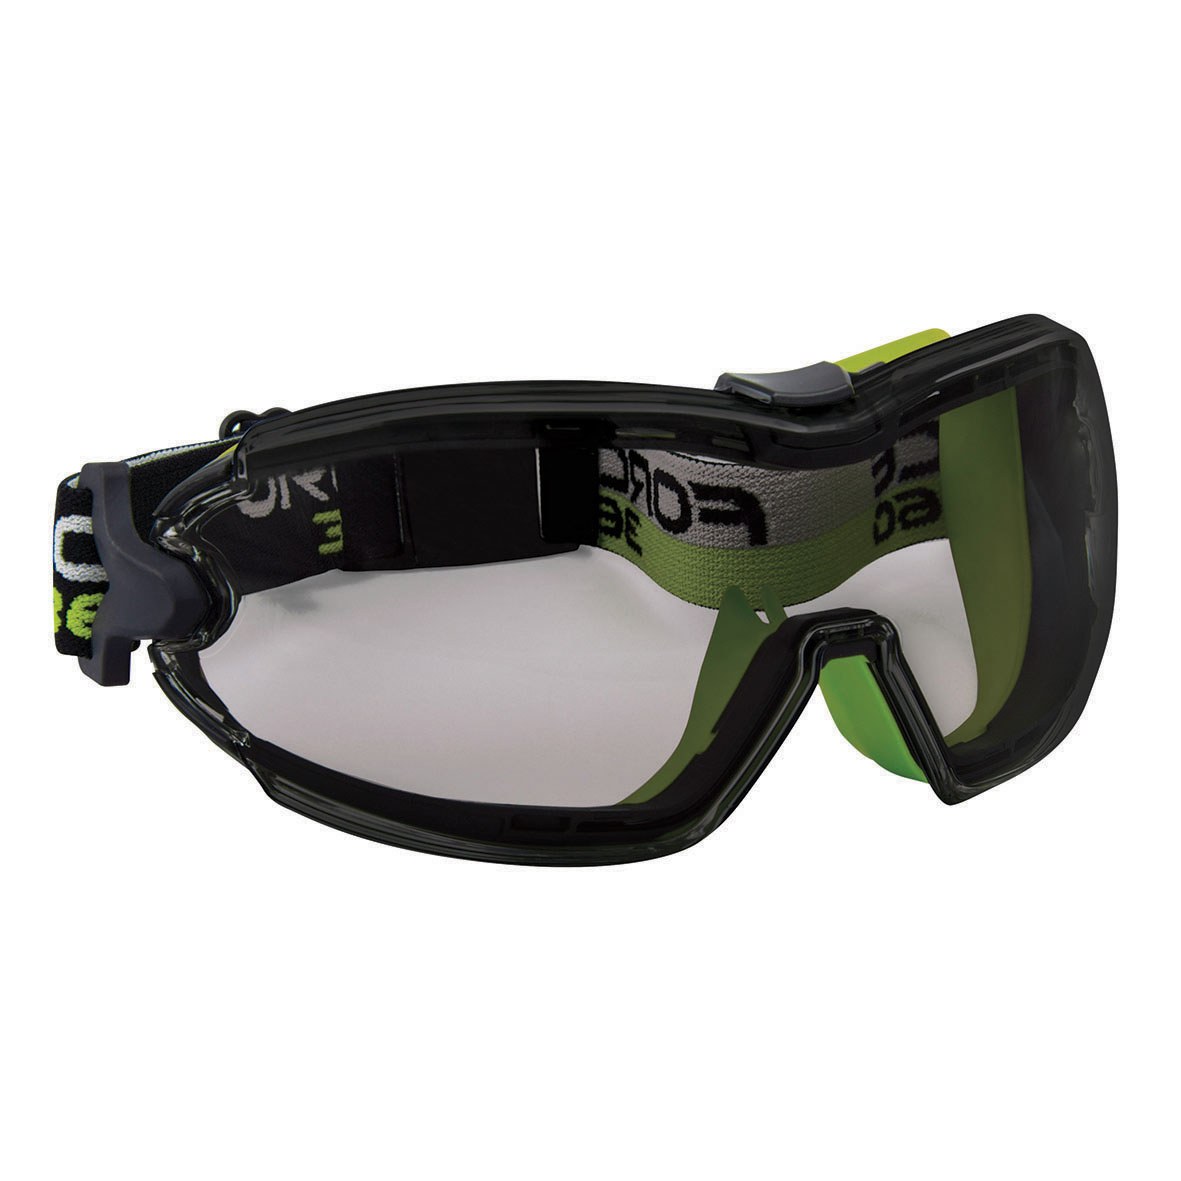 Efpr853 Force360 Multi Fit Goggles Smoke 002